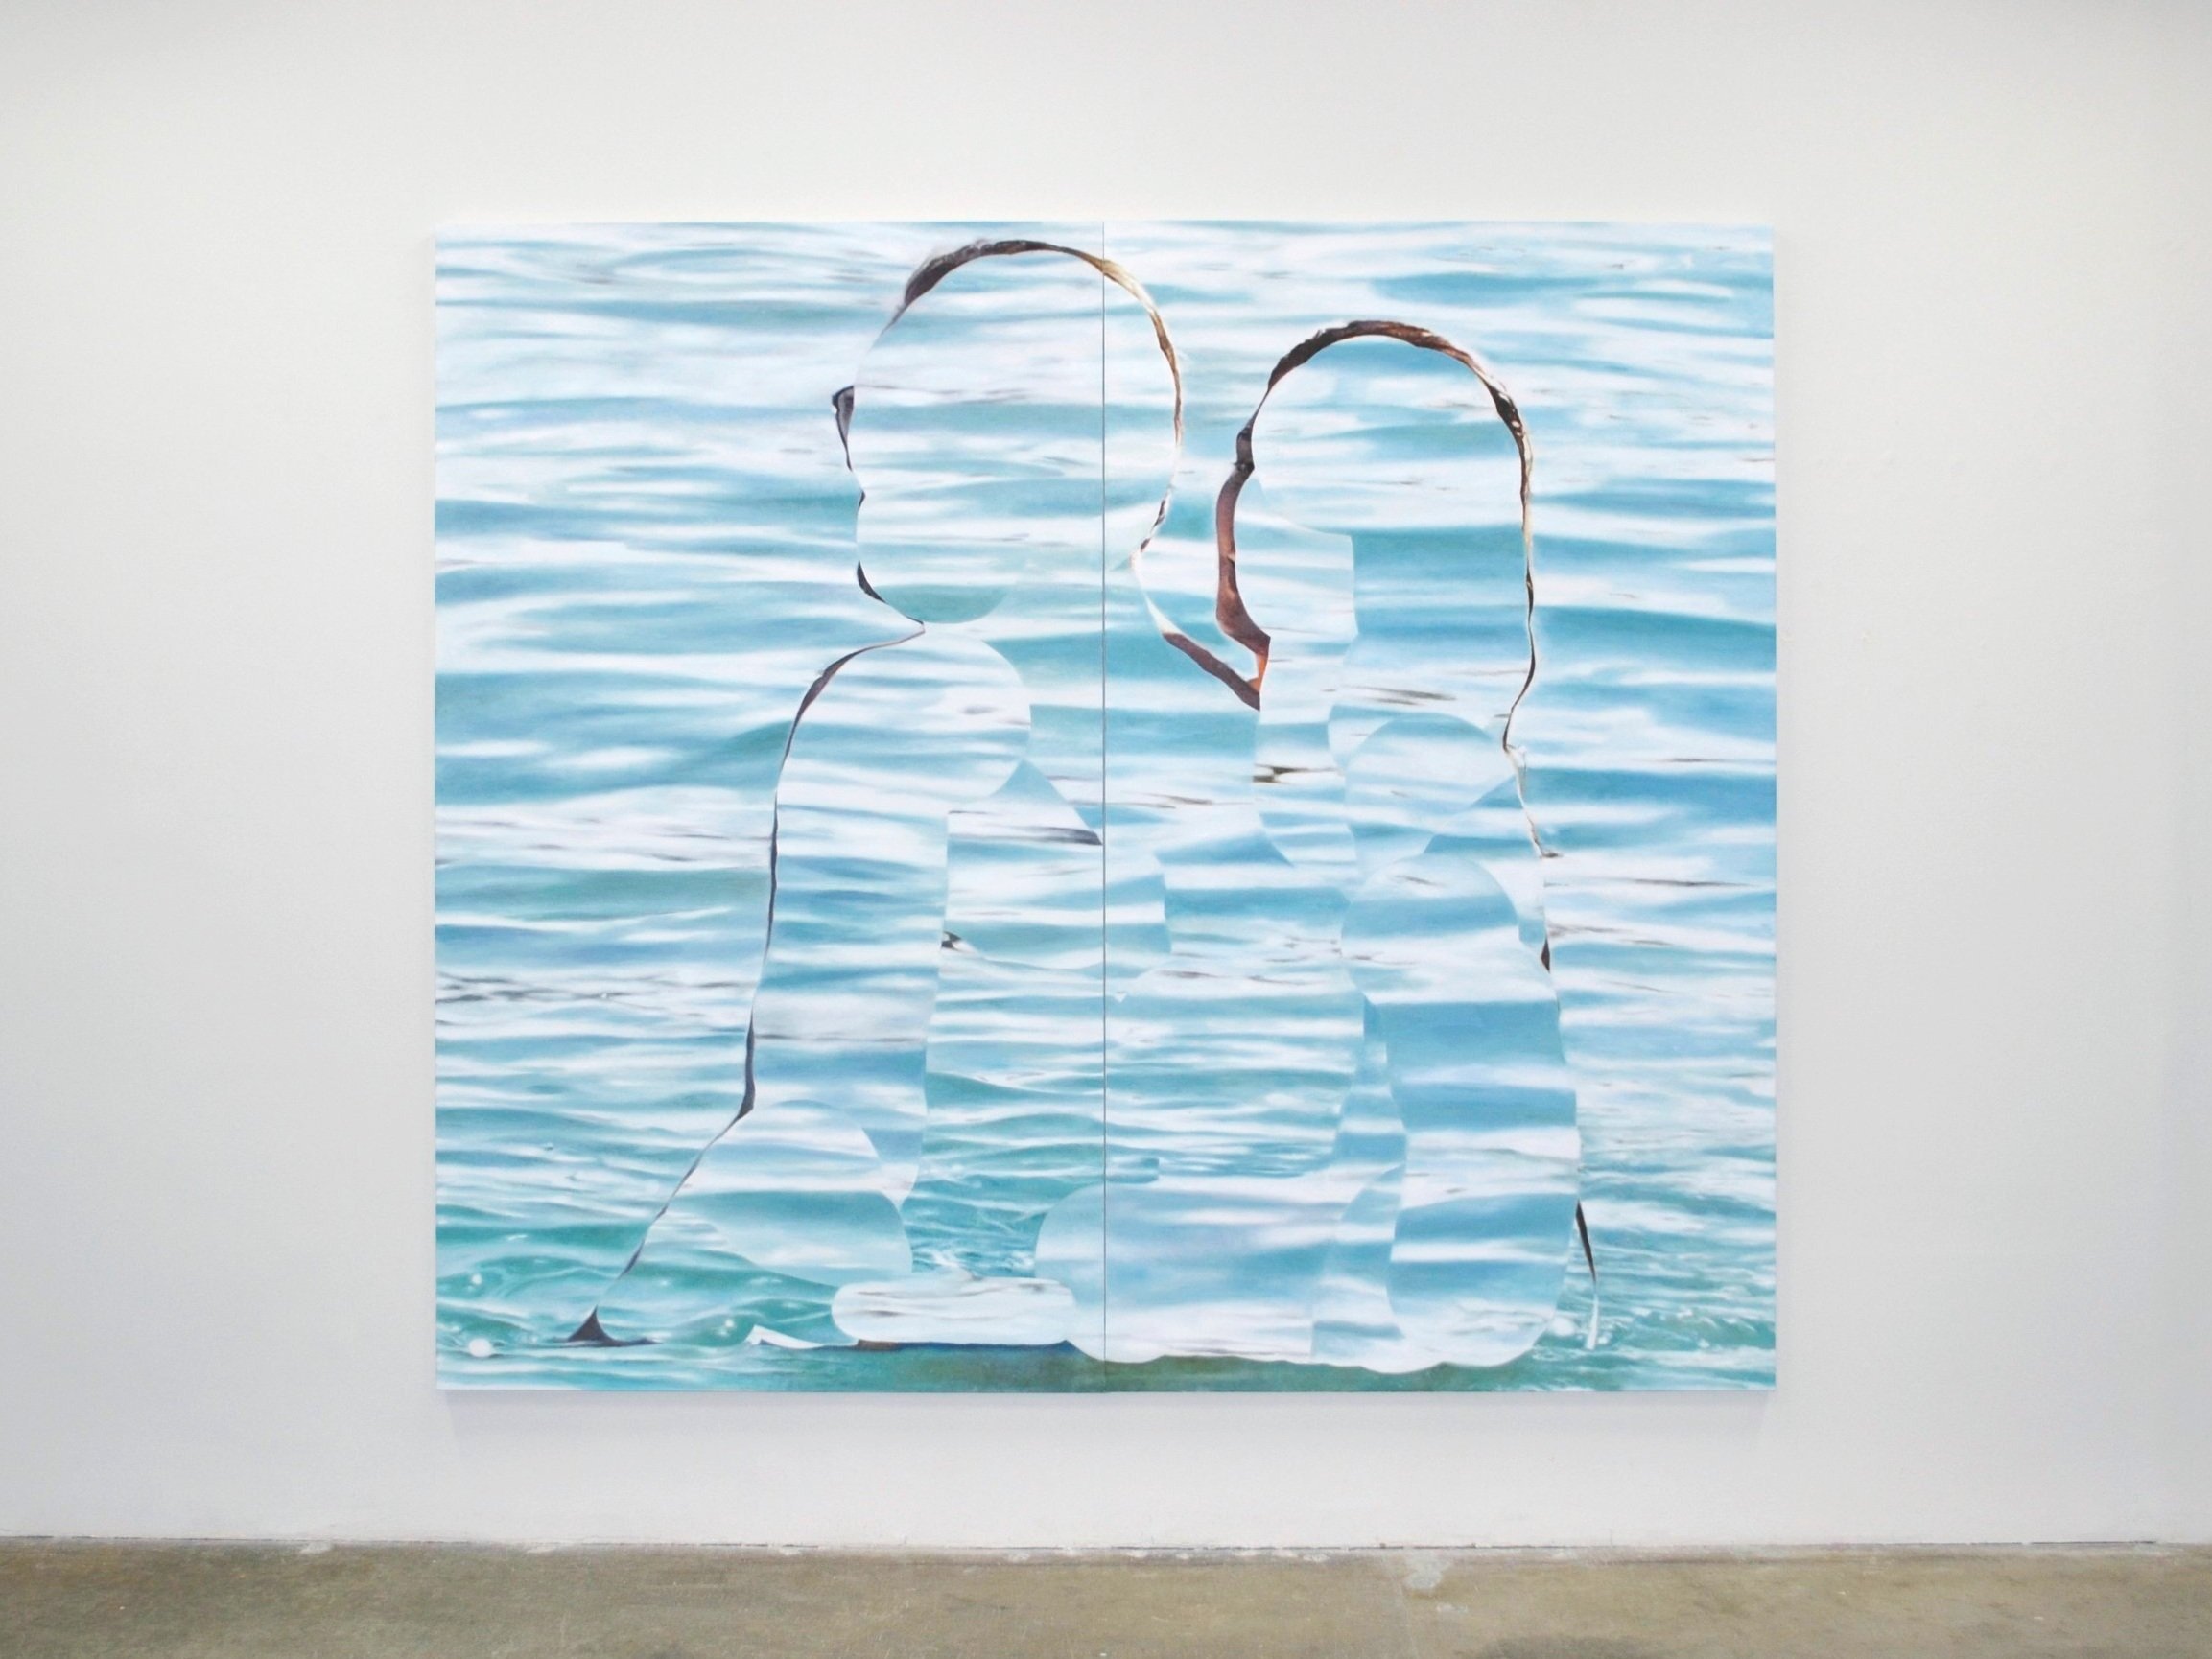  Evan Mazellan /  Couple in Water  / Oil on canvas / In 2 parts, each: 84 x 48 inches 